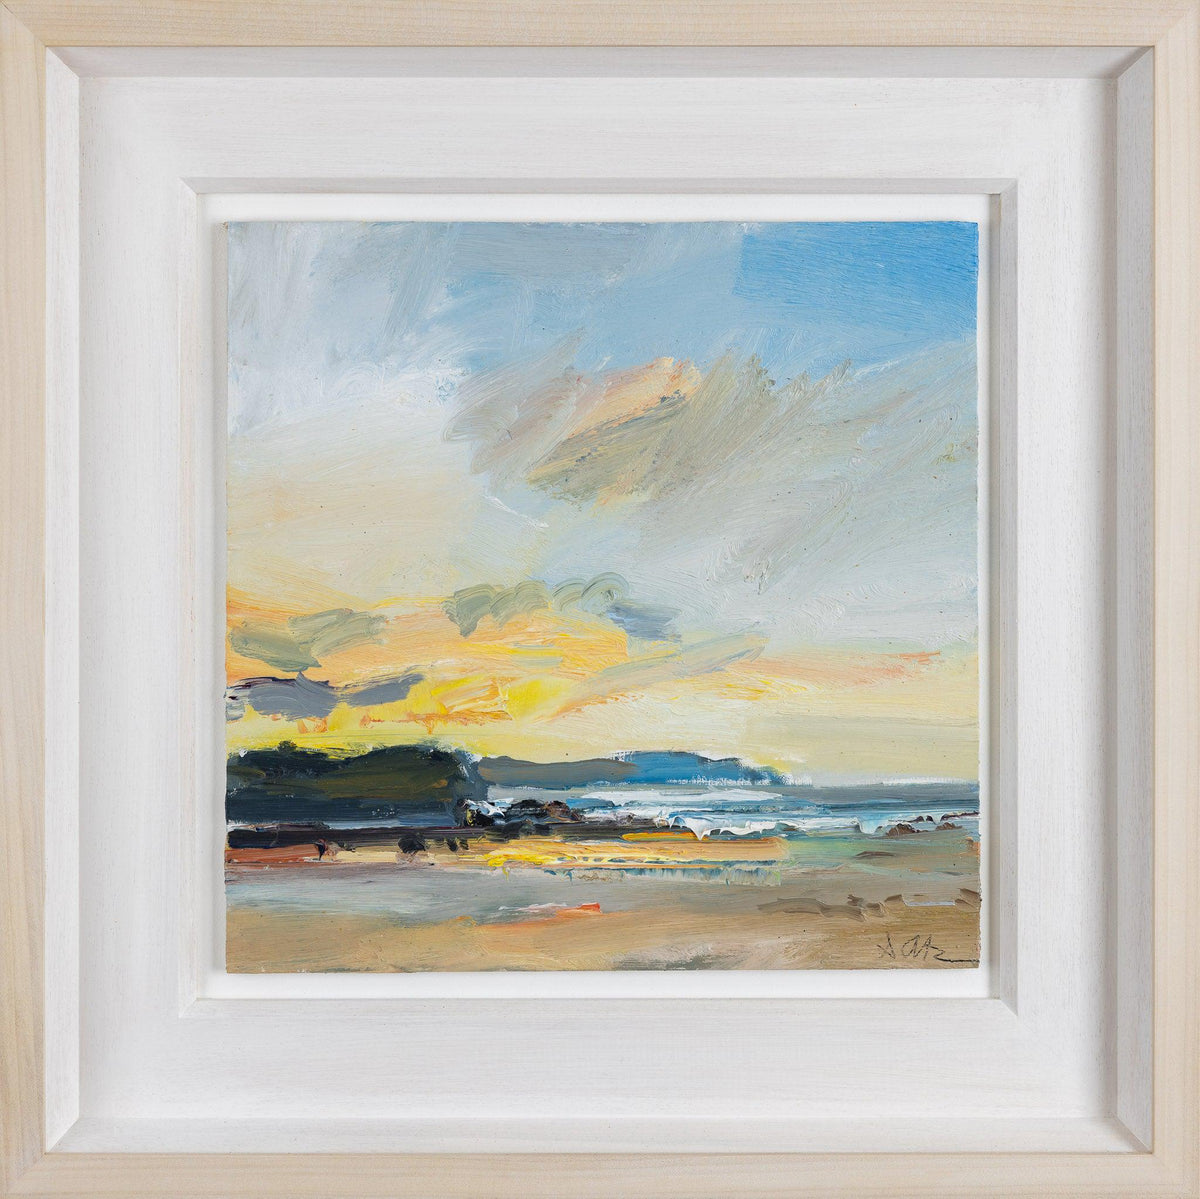 &#39;Sunset, Trevone Bay&#39; oil on board original by David Atkins, available at Padstow Gallery, Cornwall